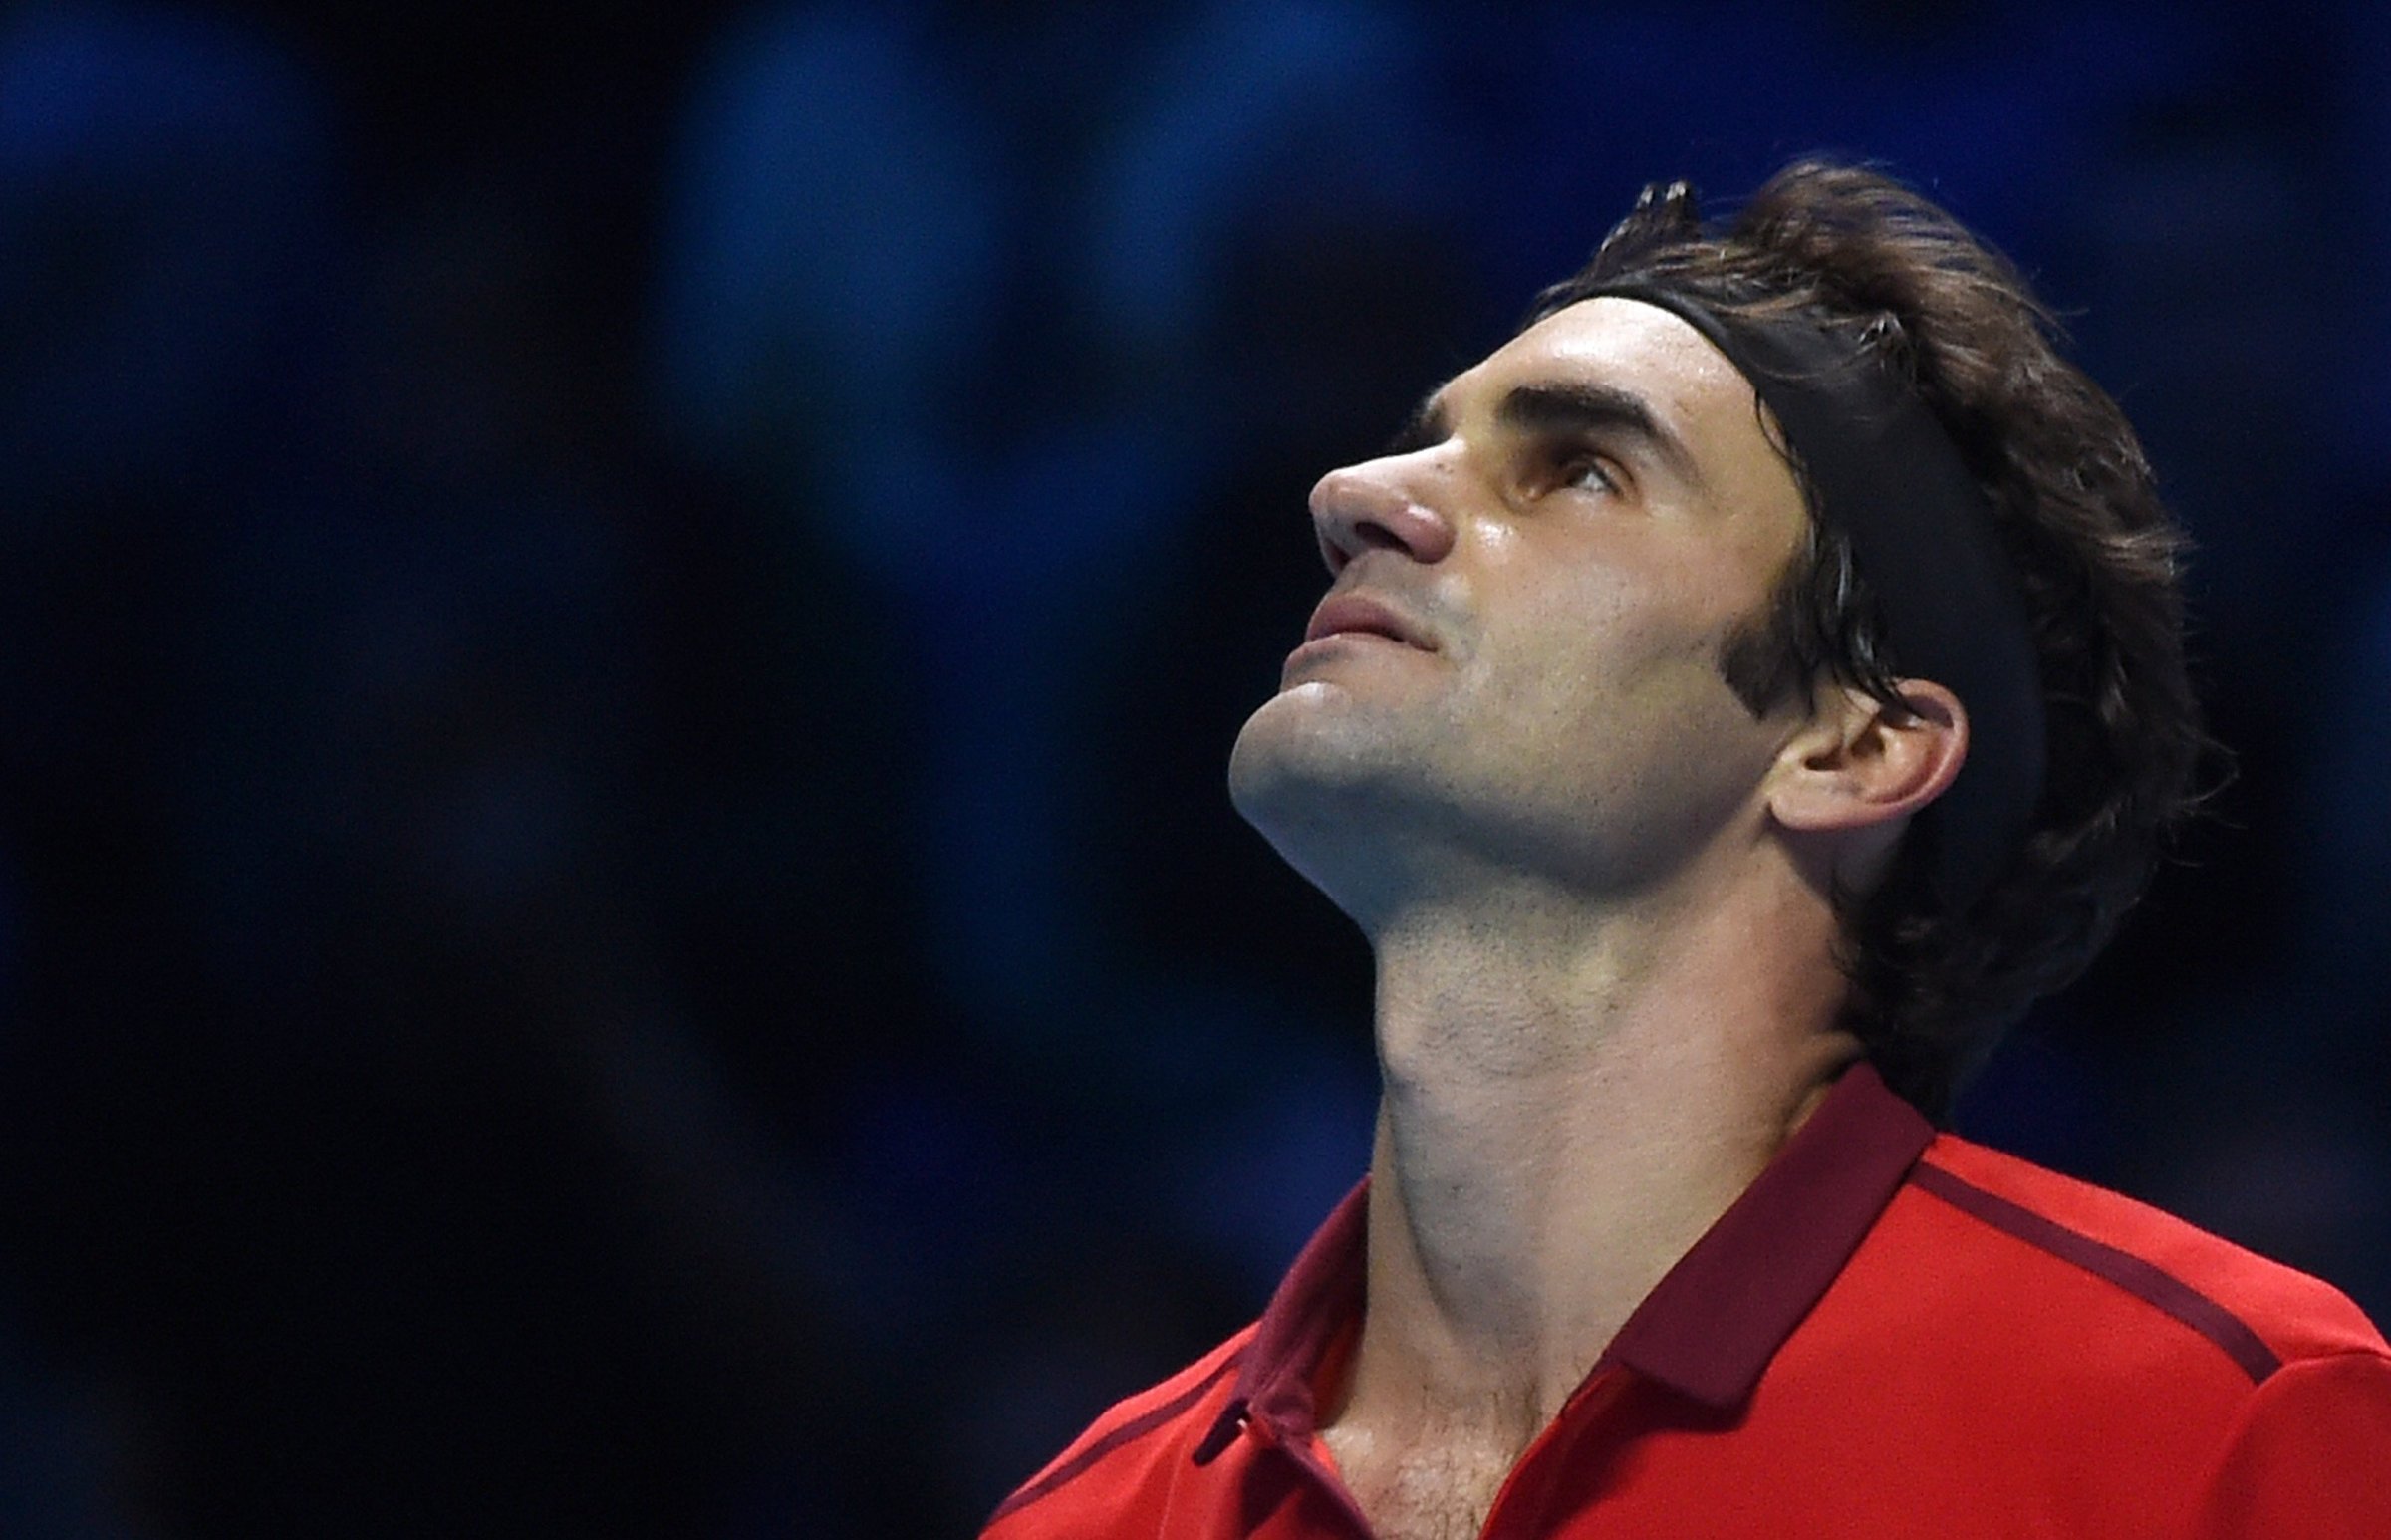 Roger Federer looks up during his singles ATP World Tour Finals semifinal tennis match against Switzerlands Stan Wawrinka at the O2 Arena in London on Nov. 15, 2014.